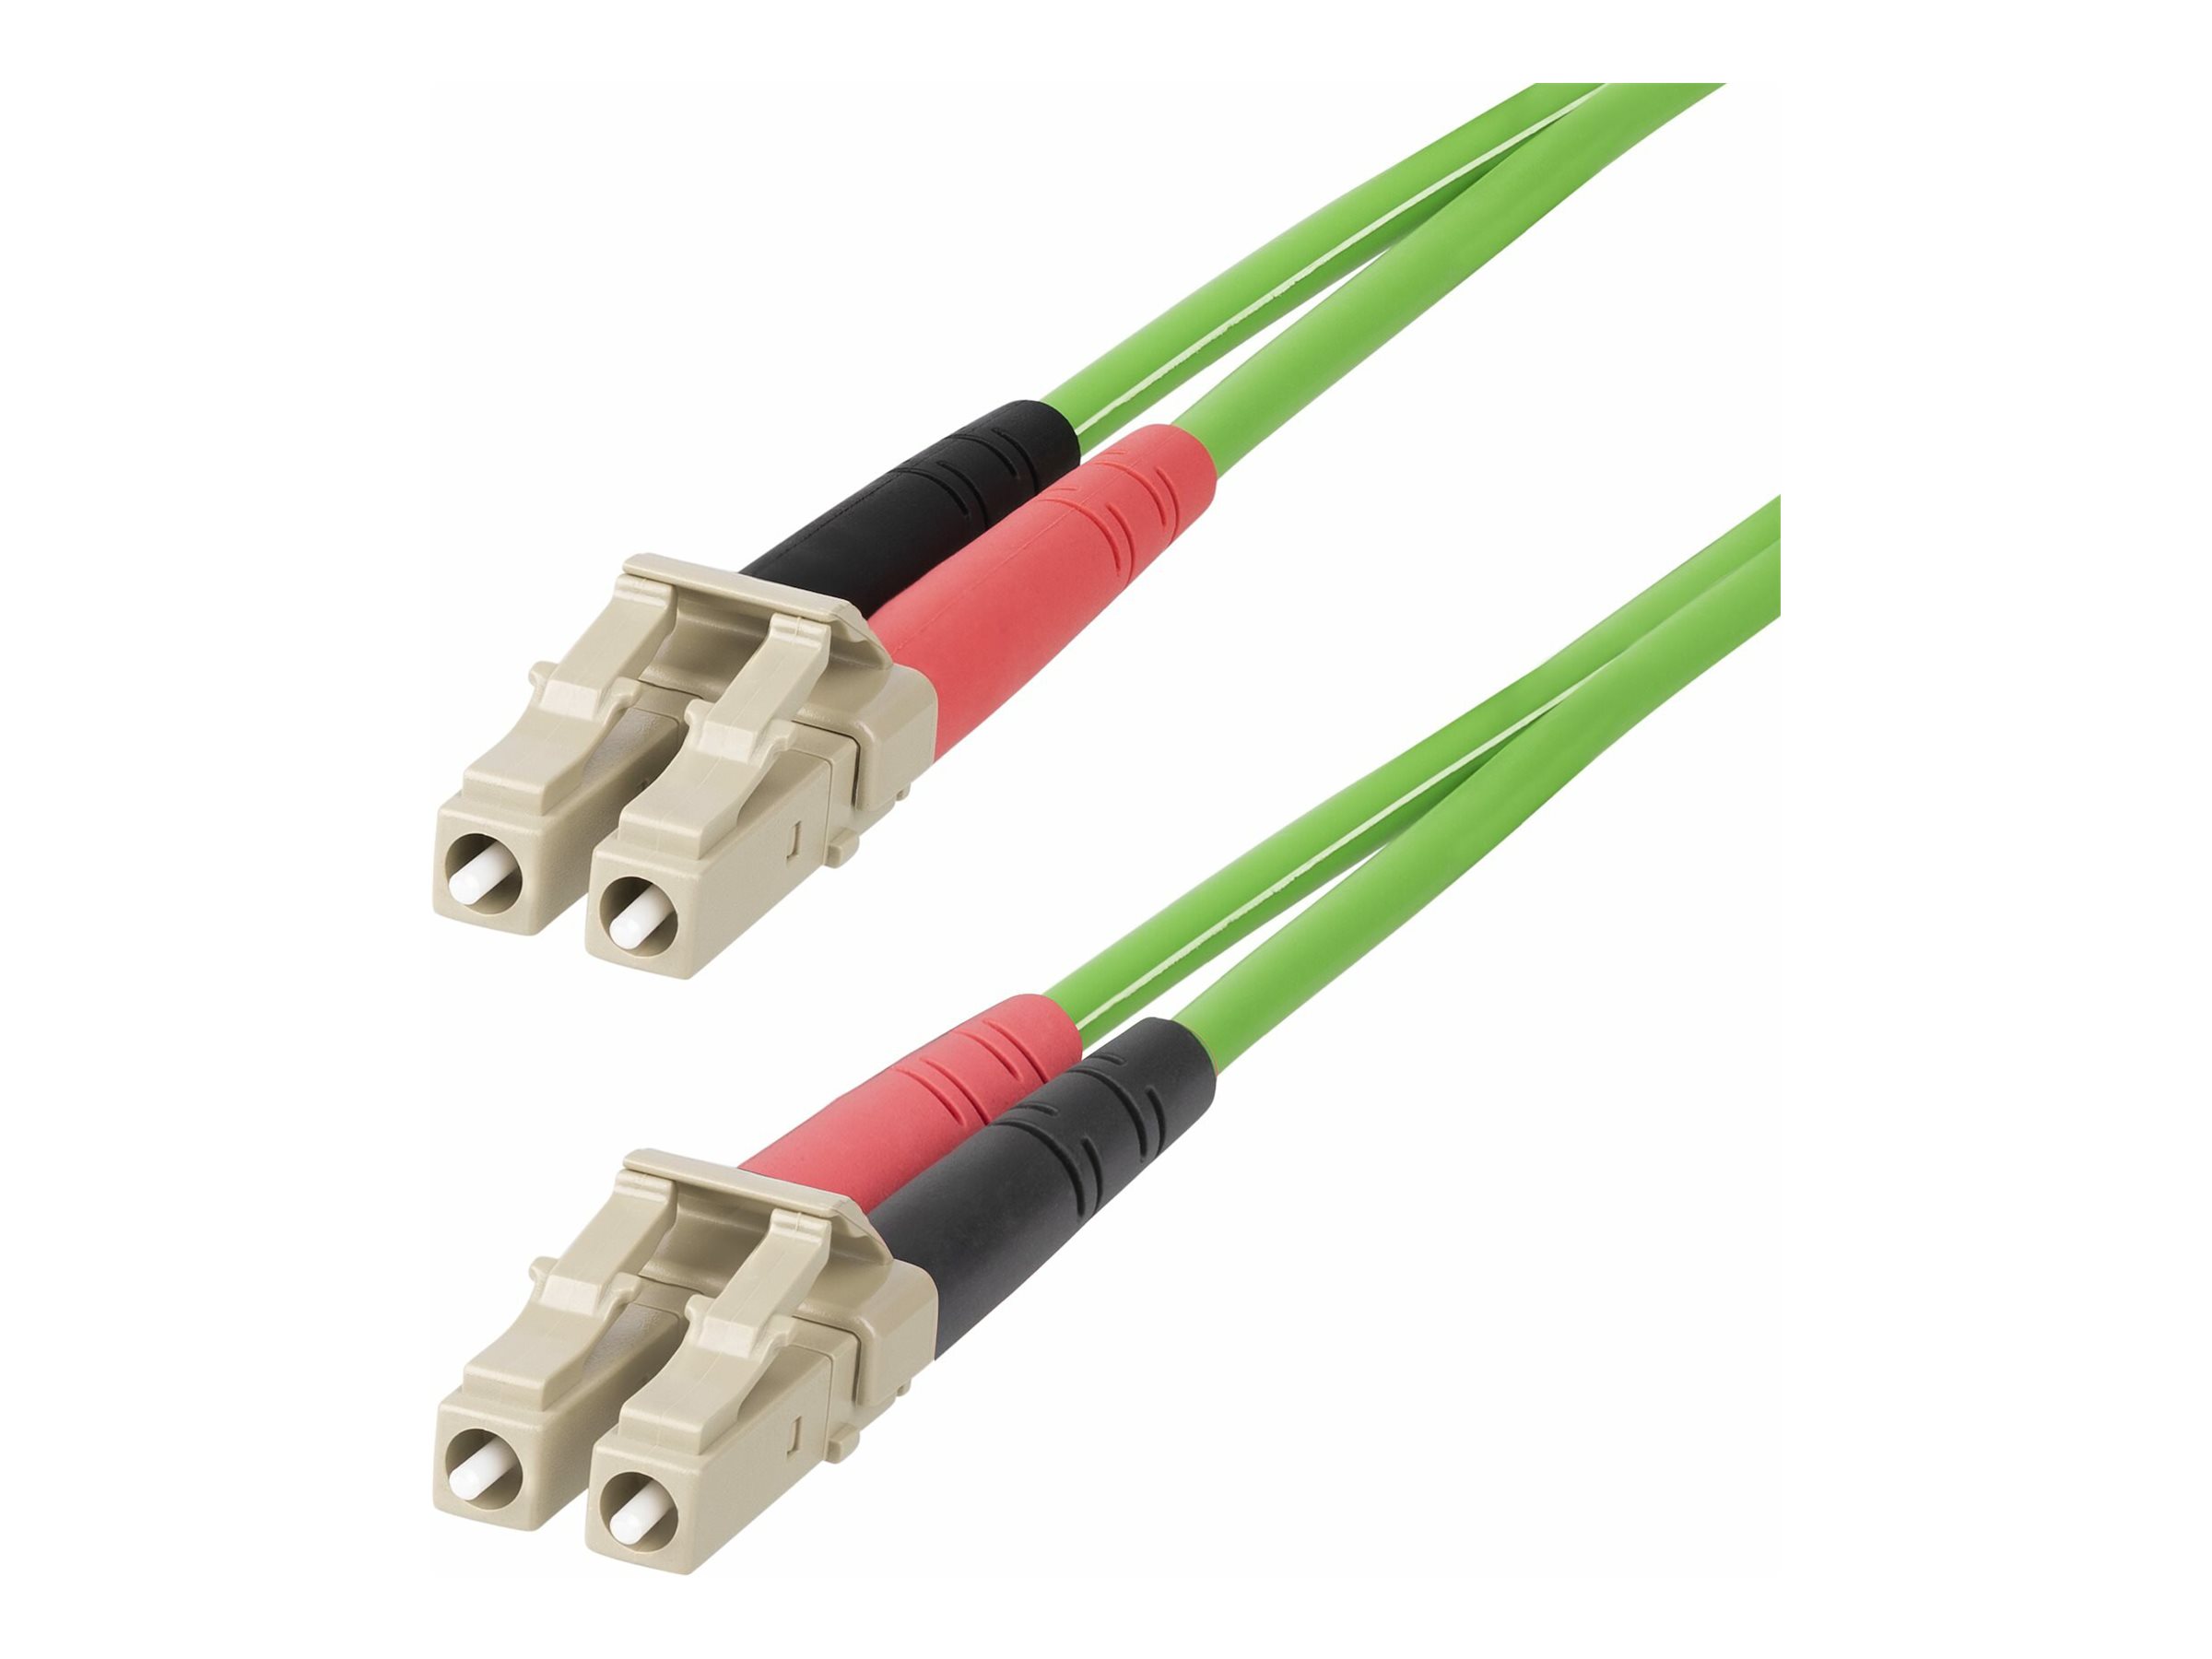 StarTech.com 5m (15ft) LC to LC (UPC) OM5 Multimode Fiber Optic Cable, 50/125m Duplex LOMMF Zipcord, VCSEL, 40G/100G, Bend Inse